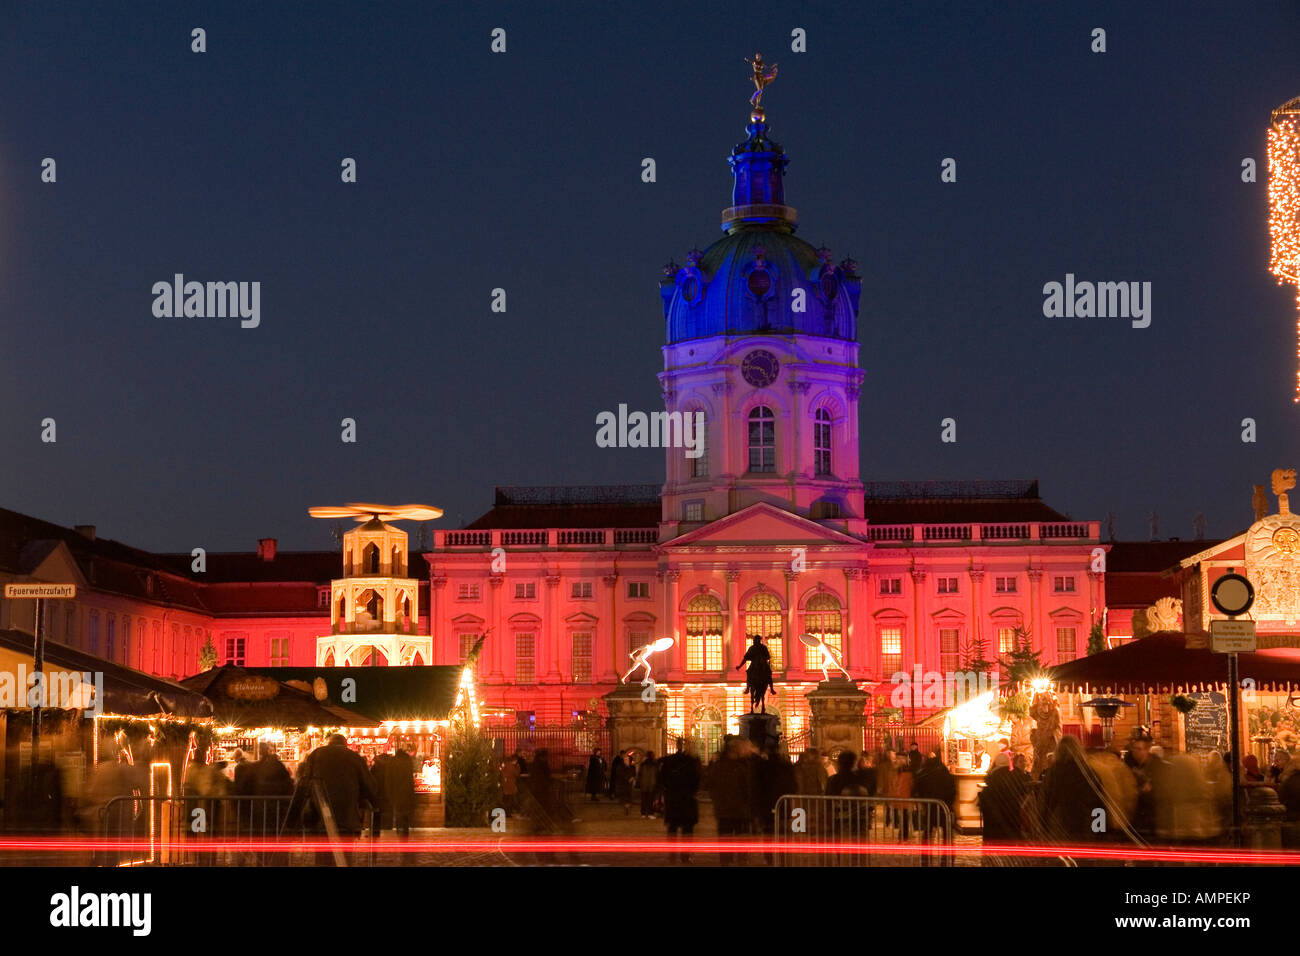 Germany Capital Berlin The first Christmas market in front of the illuminated Charlottenburg Palace the summer residence of the Stock Photo